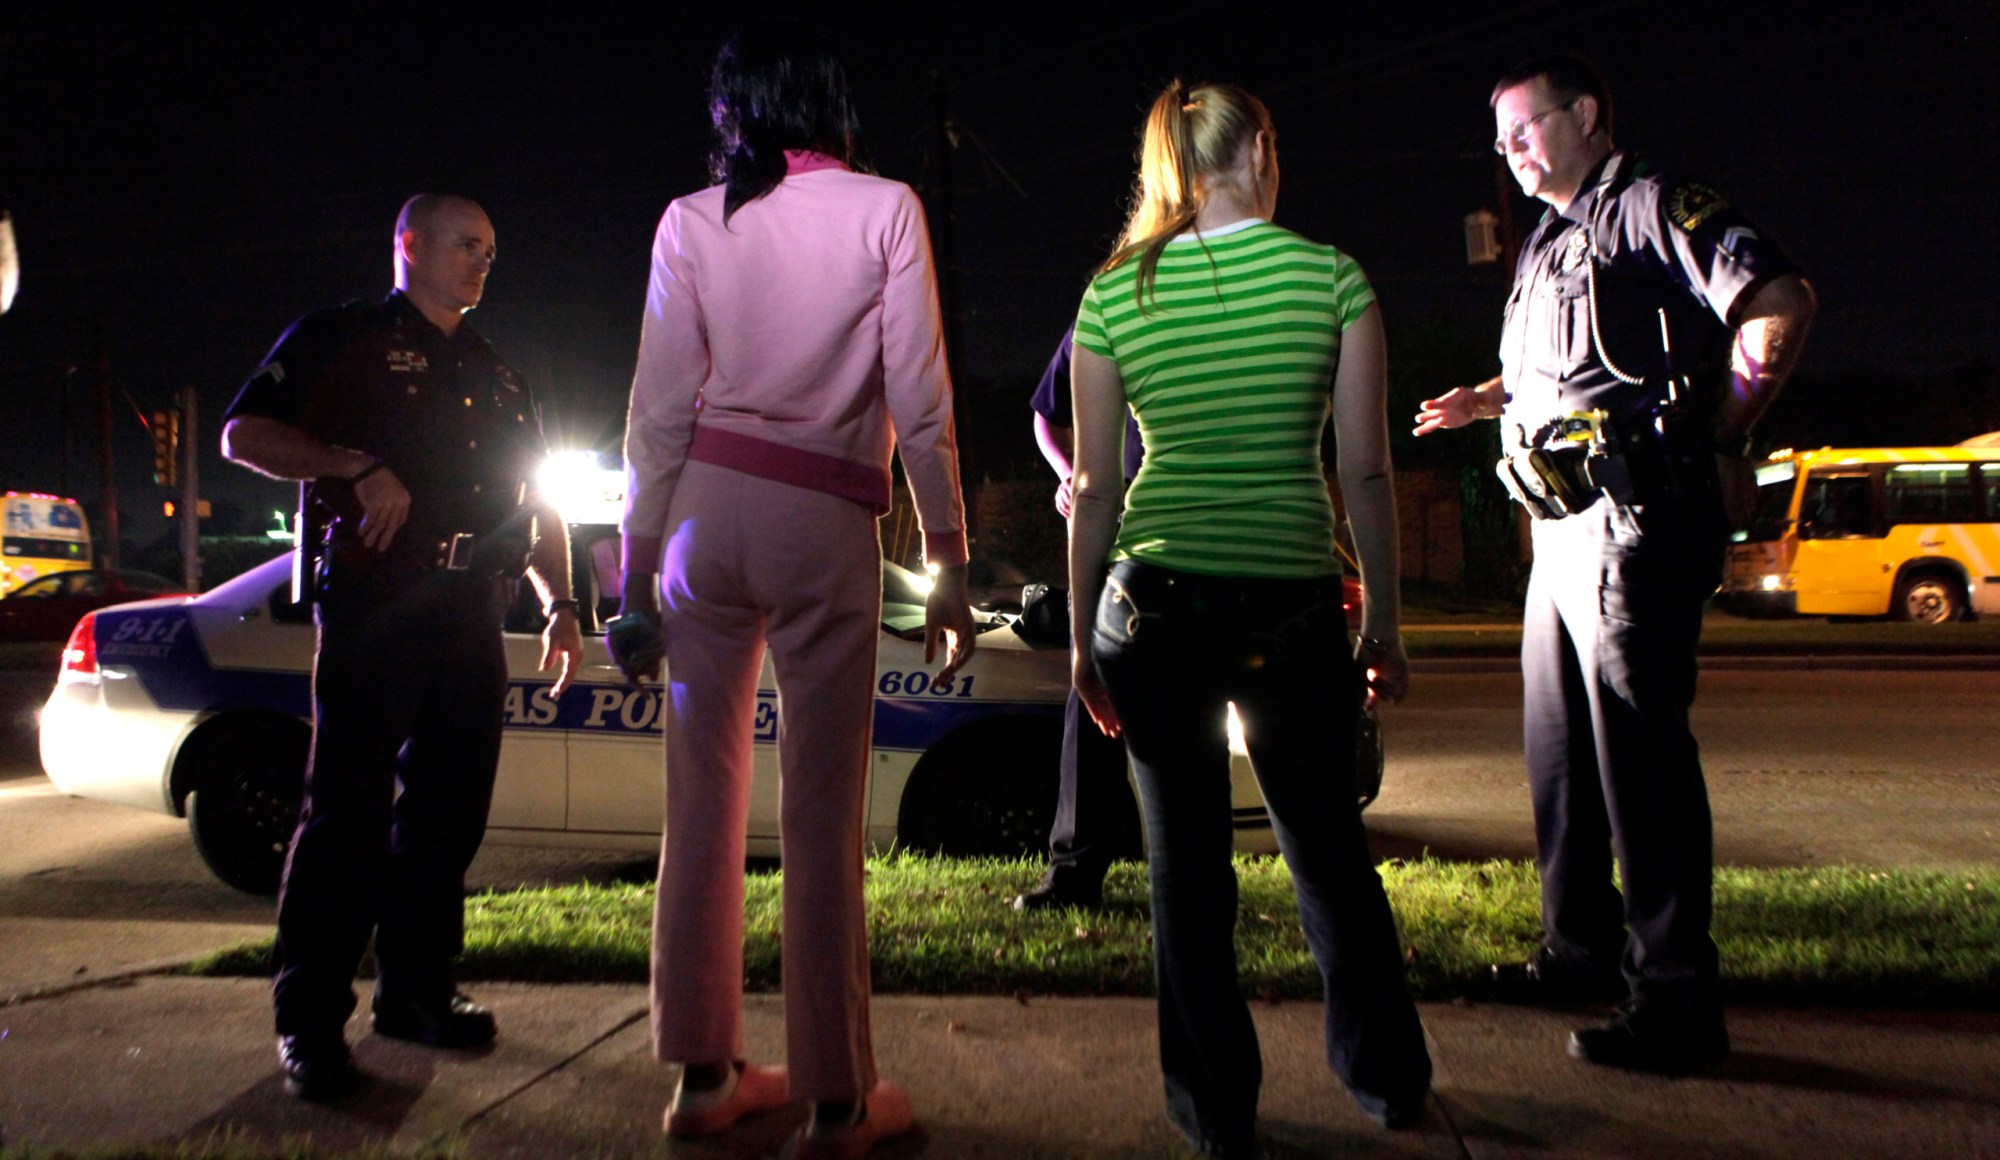 Police talk to two young women before arresting them for prostitution in Dallas. One of the women was underage at the time of her arrest. (AP/LM Otero)